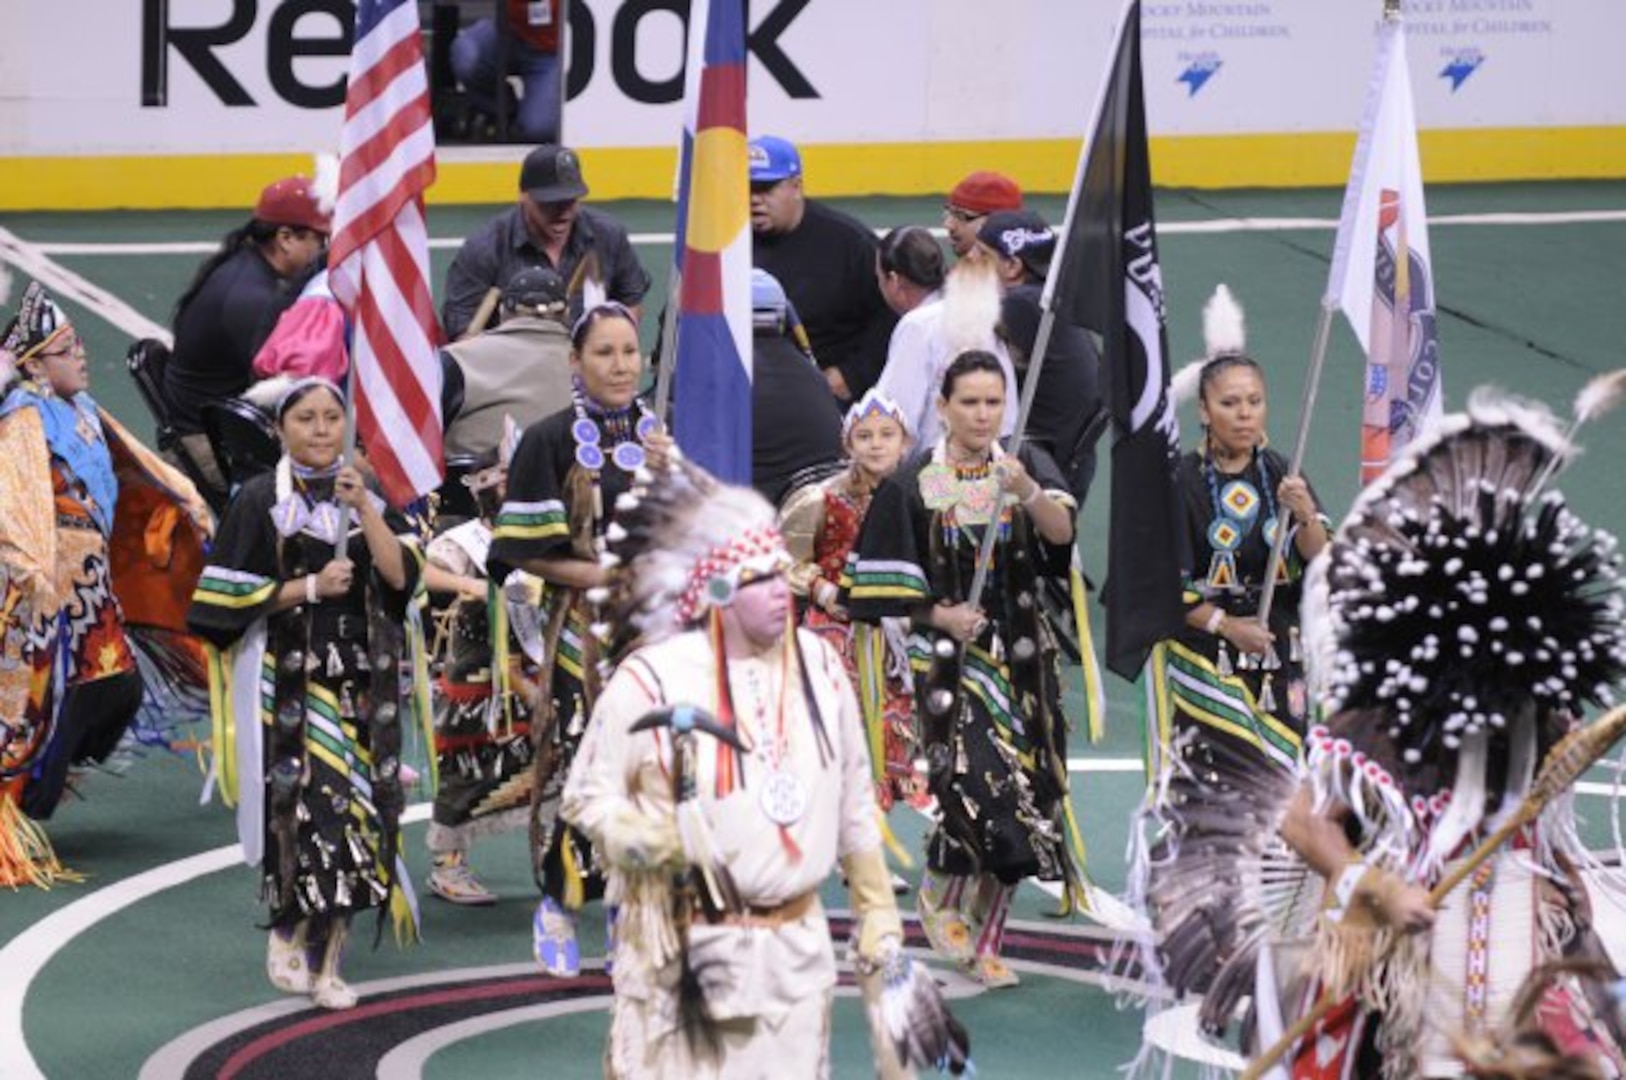 Members of the Sister Nations Color Guard, Colorado Army National Guard Staff Sgt. Cindy Littlefeather, Glenda Littlebird, Sgt. 1st Class Toni Eaglefeathers, and Carissa Gonzales, display the colors as part of a Native American presentation during halftime at a Colorado Mammoth versus Rochester Knight Hawks lacrosse game, March 2, 2012, at the Pepsi Center in Denver. The Sister Nations is a group of current and former Native American Soldiers who perform traditional dance and color guard. (Army National Guard photo by Capt. Michael Odgers/Released)